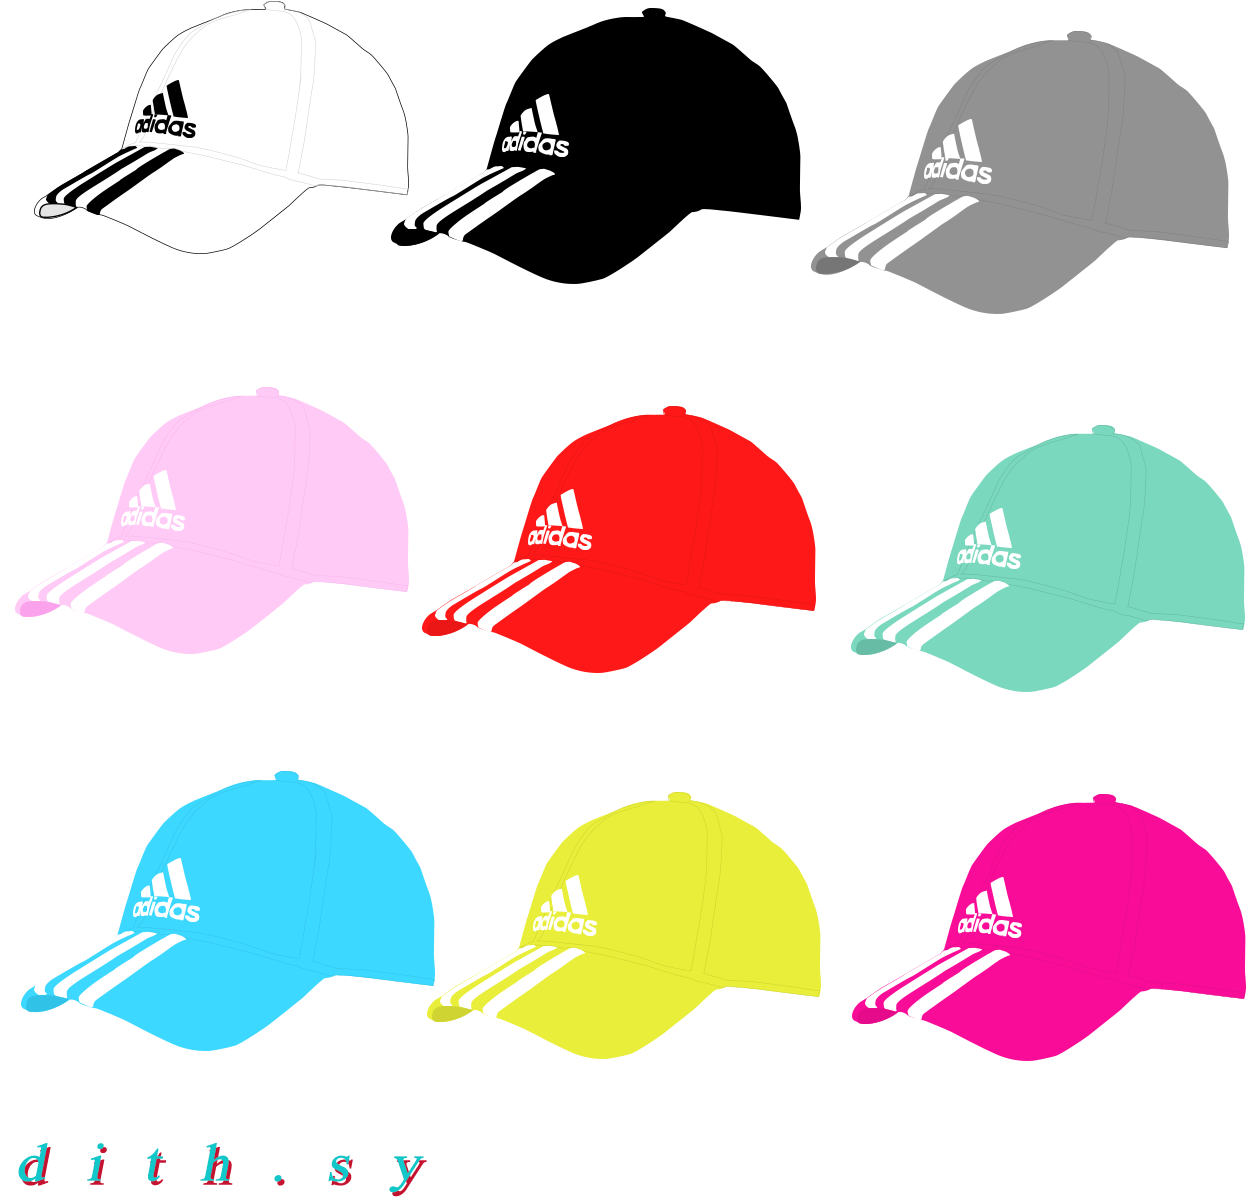 A Group Of Hats With White Stripes